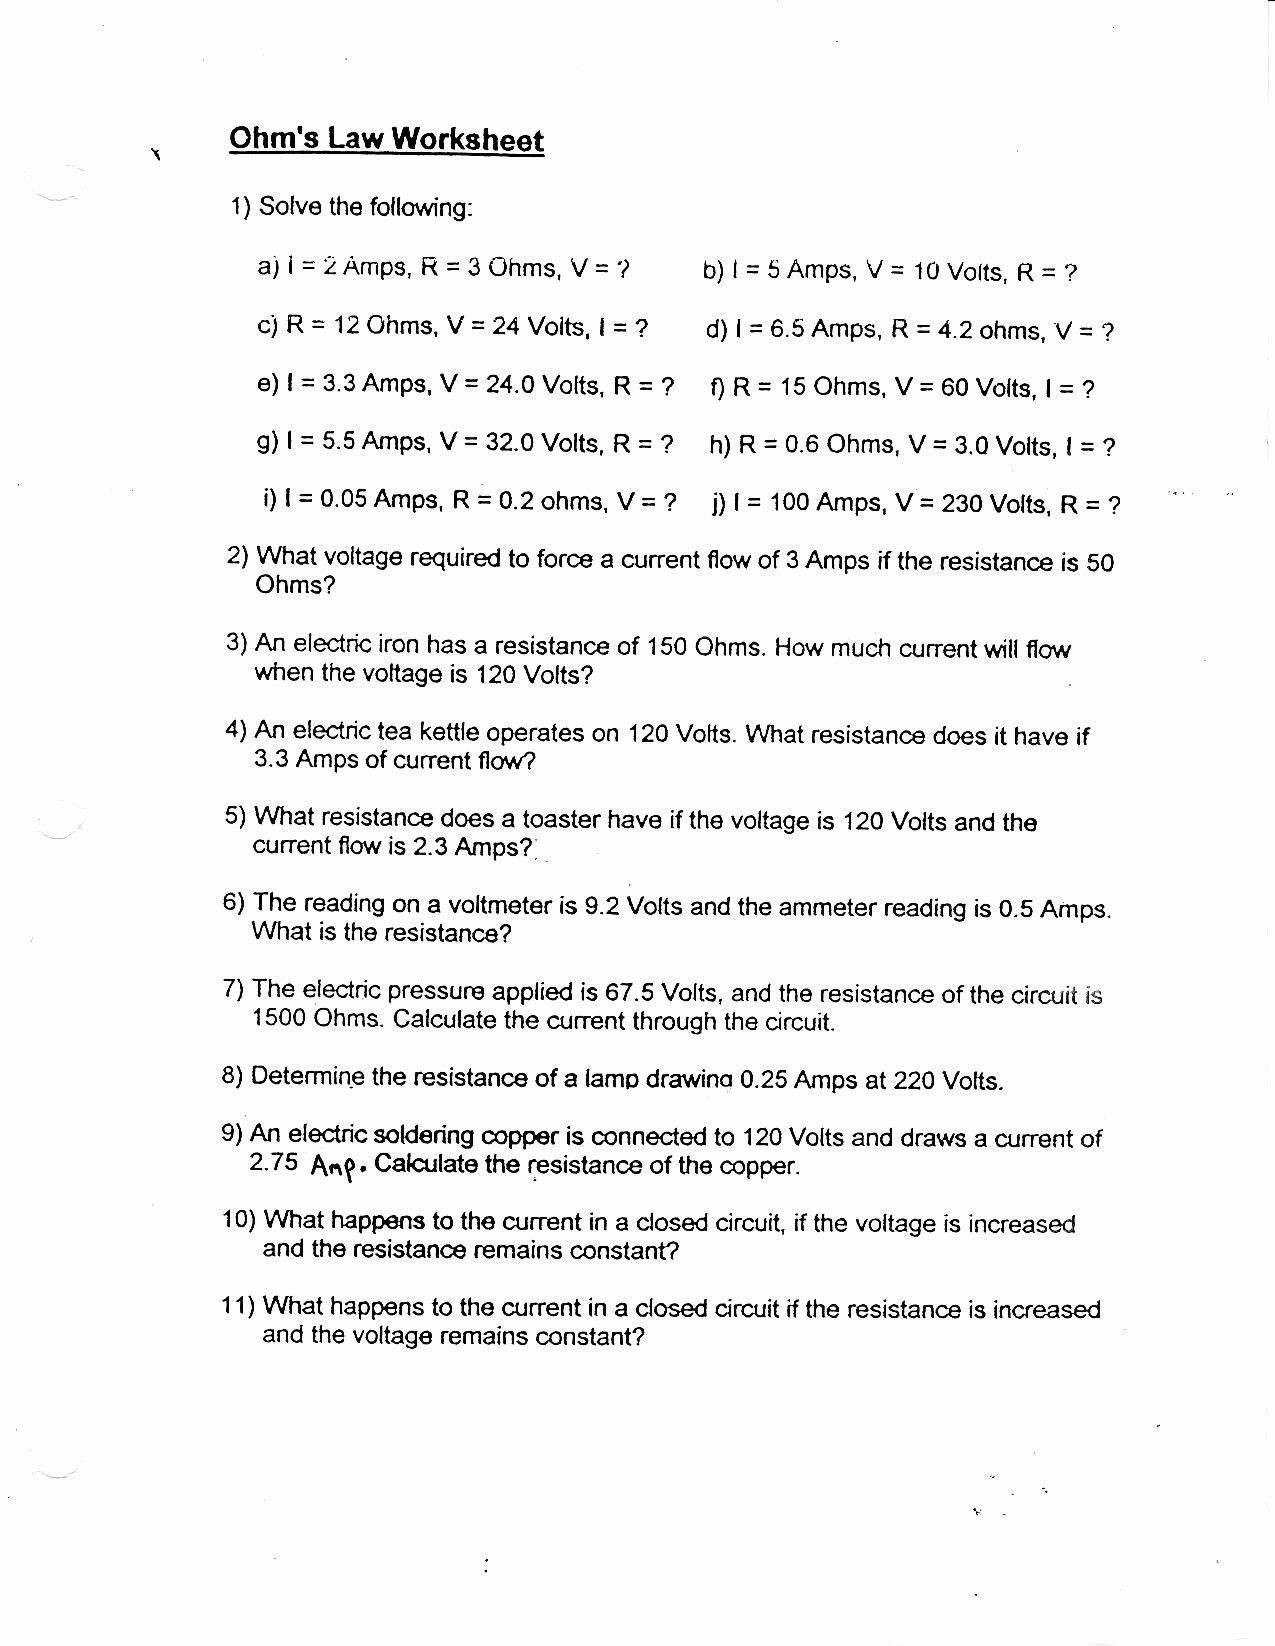 Elements Compounds Amp Mixtures Worksheet 7th Chemical and Physical Changes Worksheet